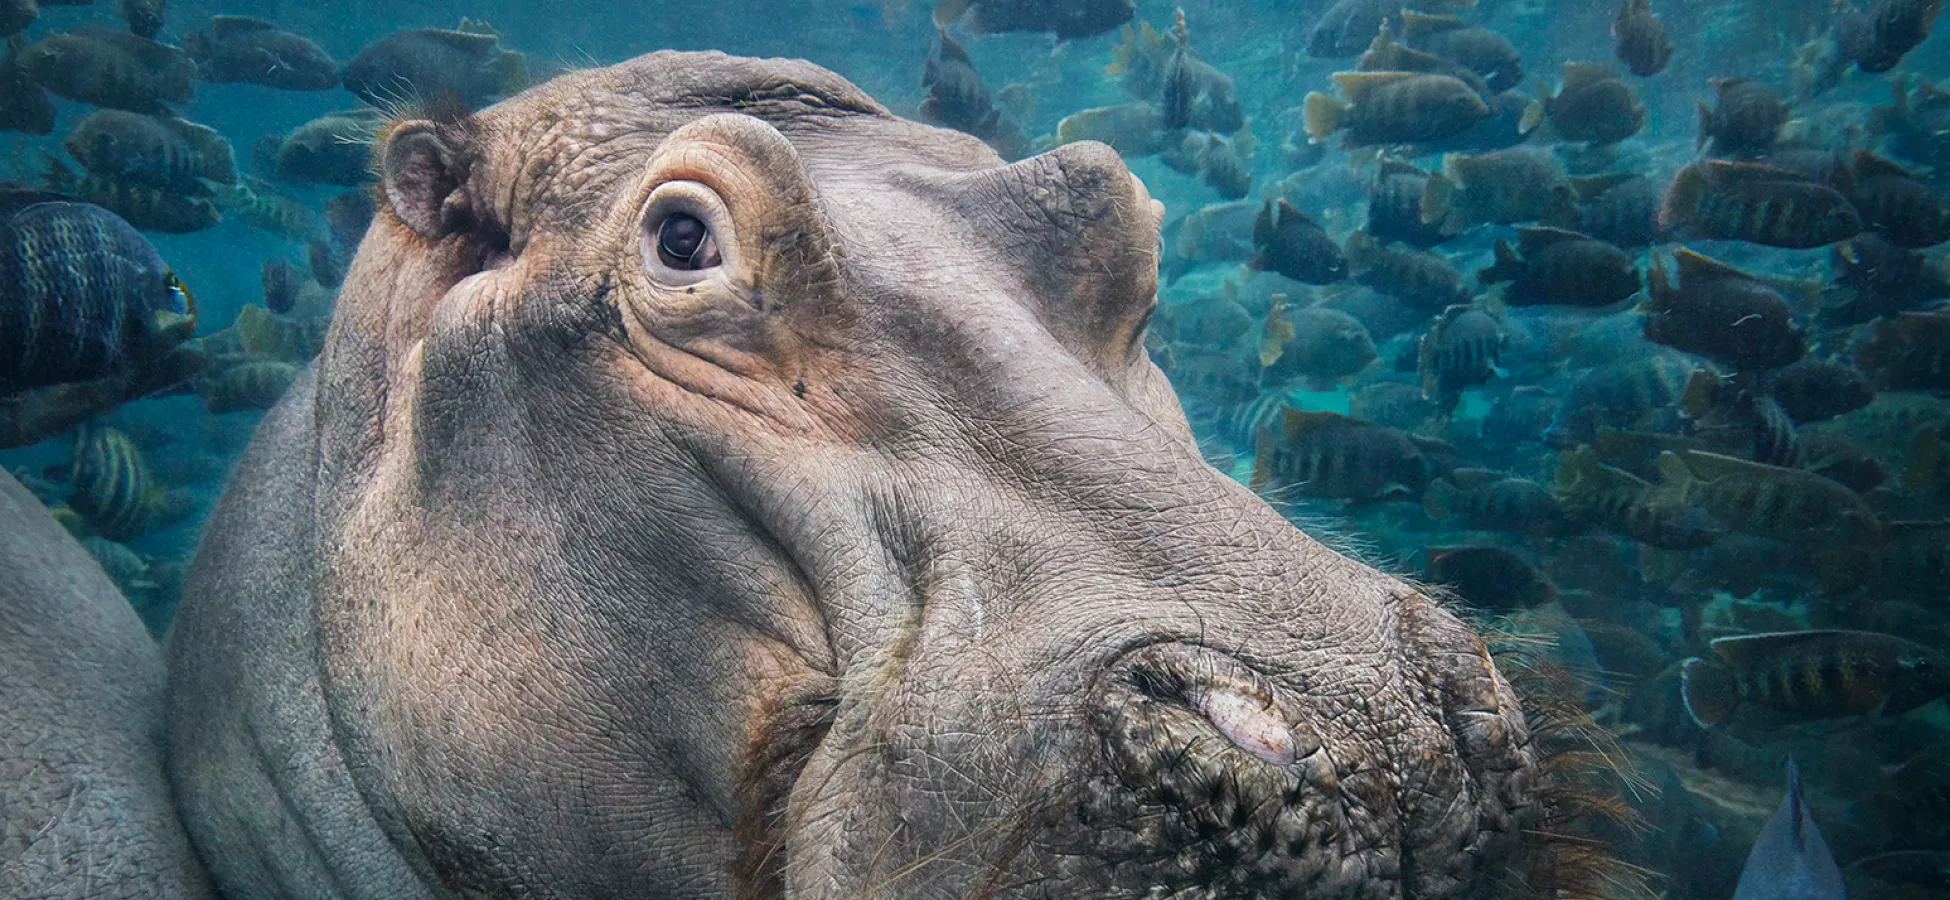 a hippopotamus under the water surrounded by a school of fish